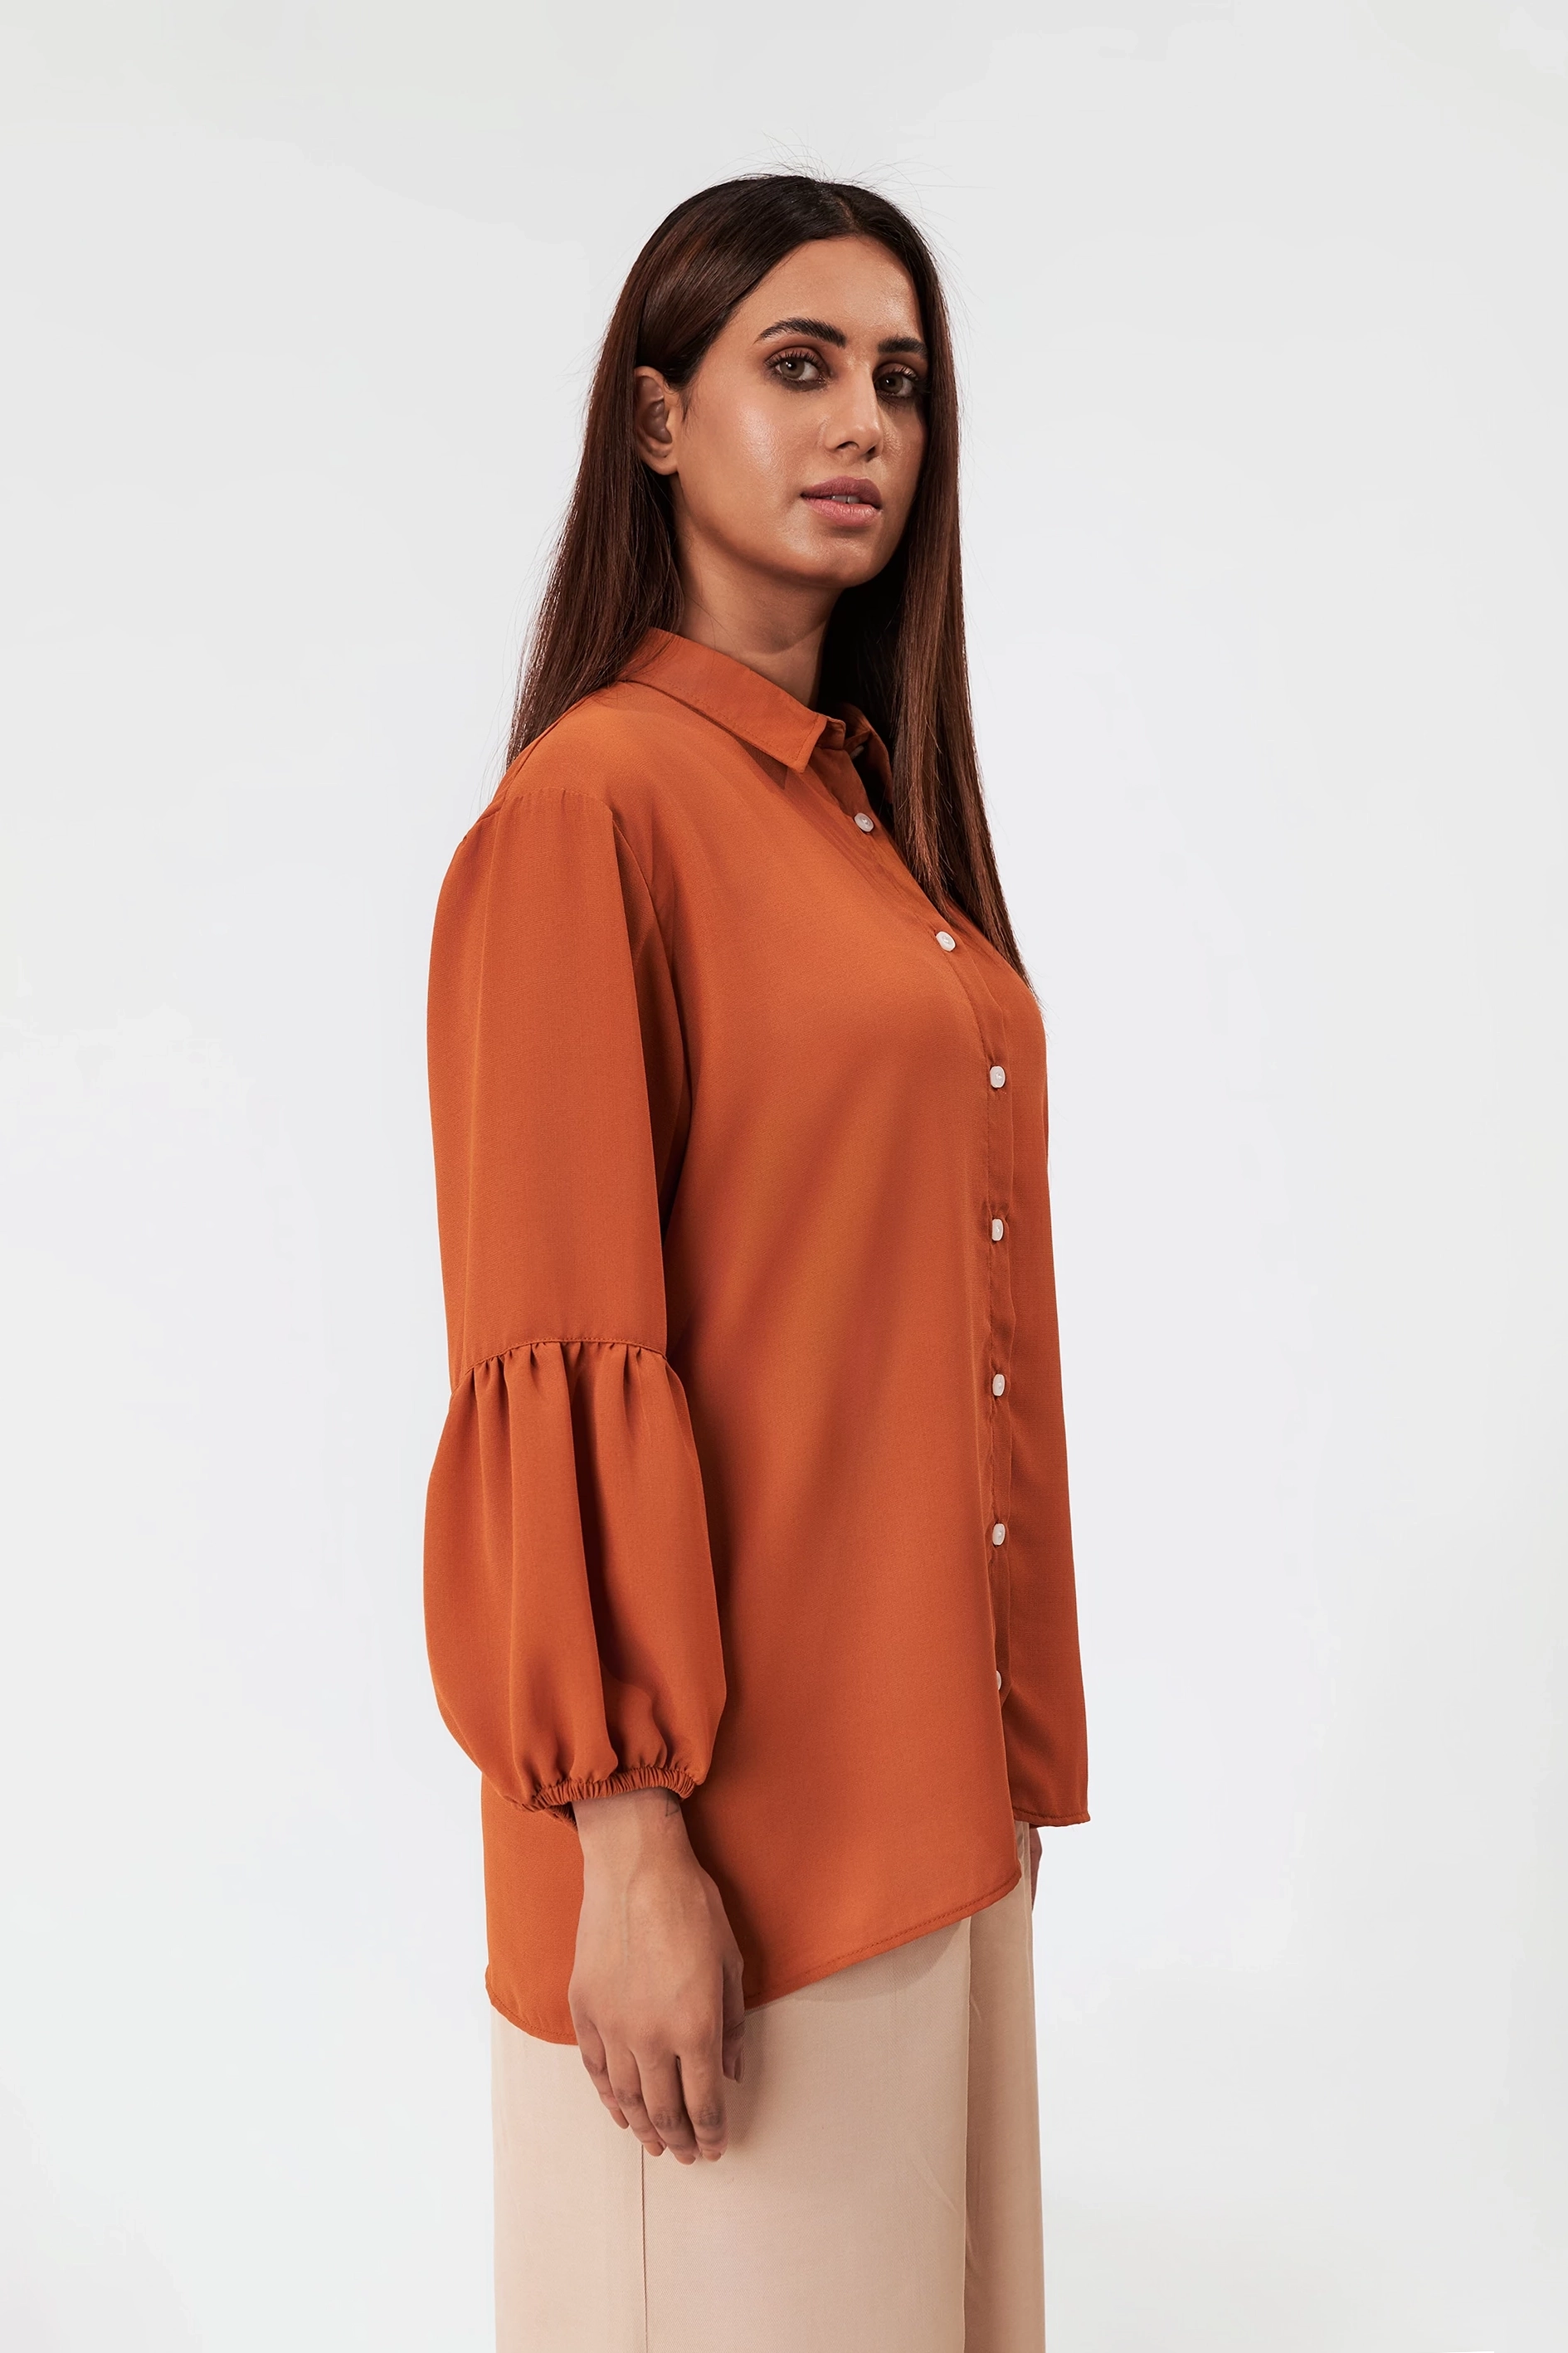 Women's Gathered Sleeves Blouse